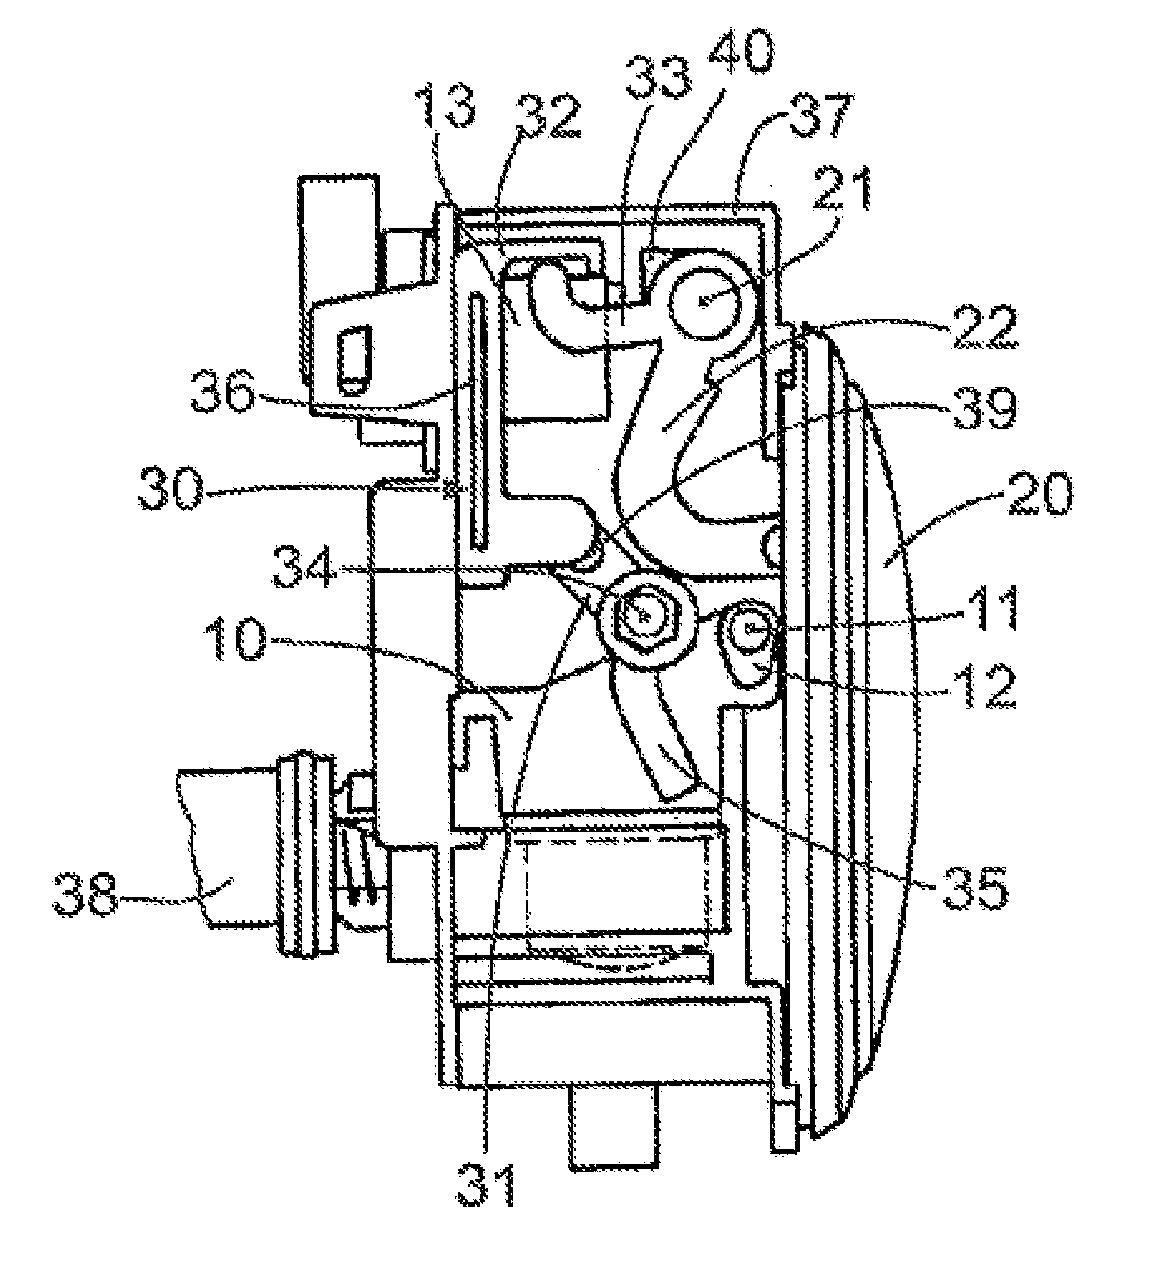 Device for a motor vehicle, comprising a rotatably mounted camera unit